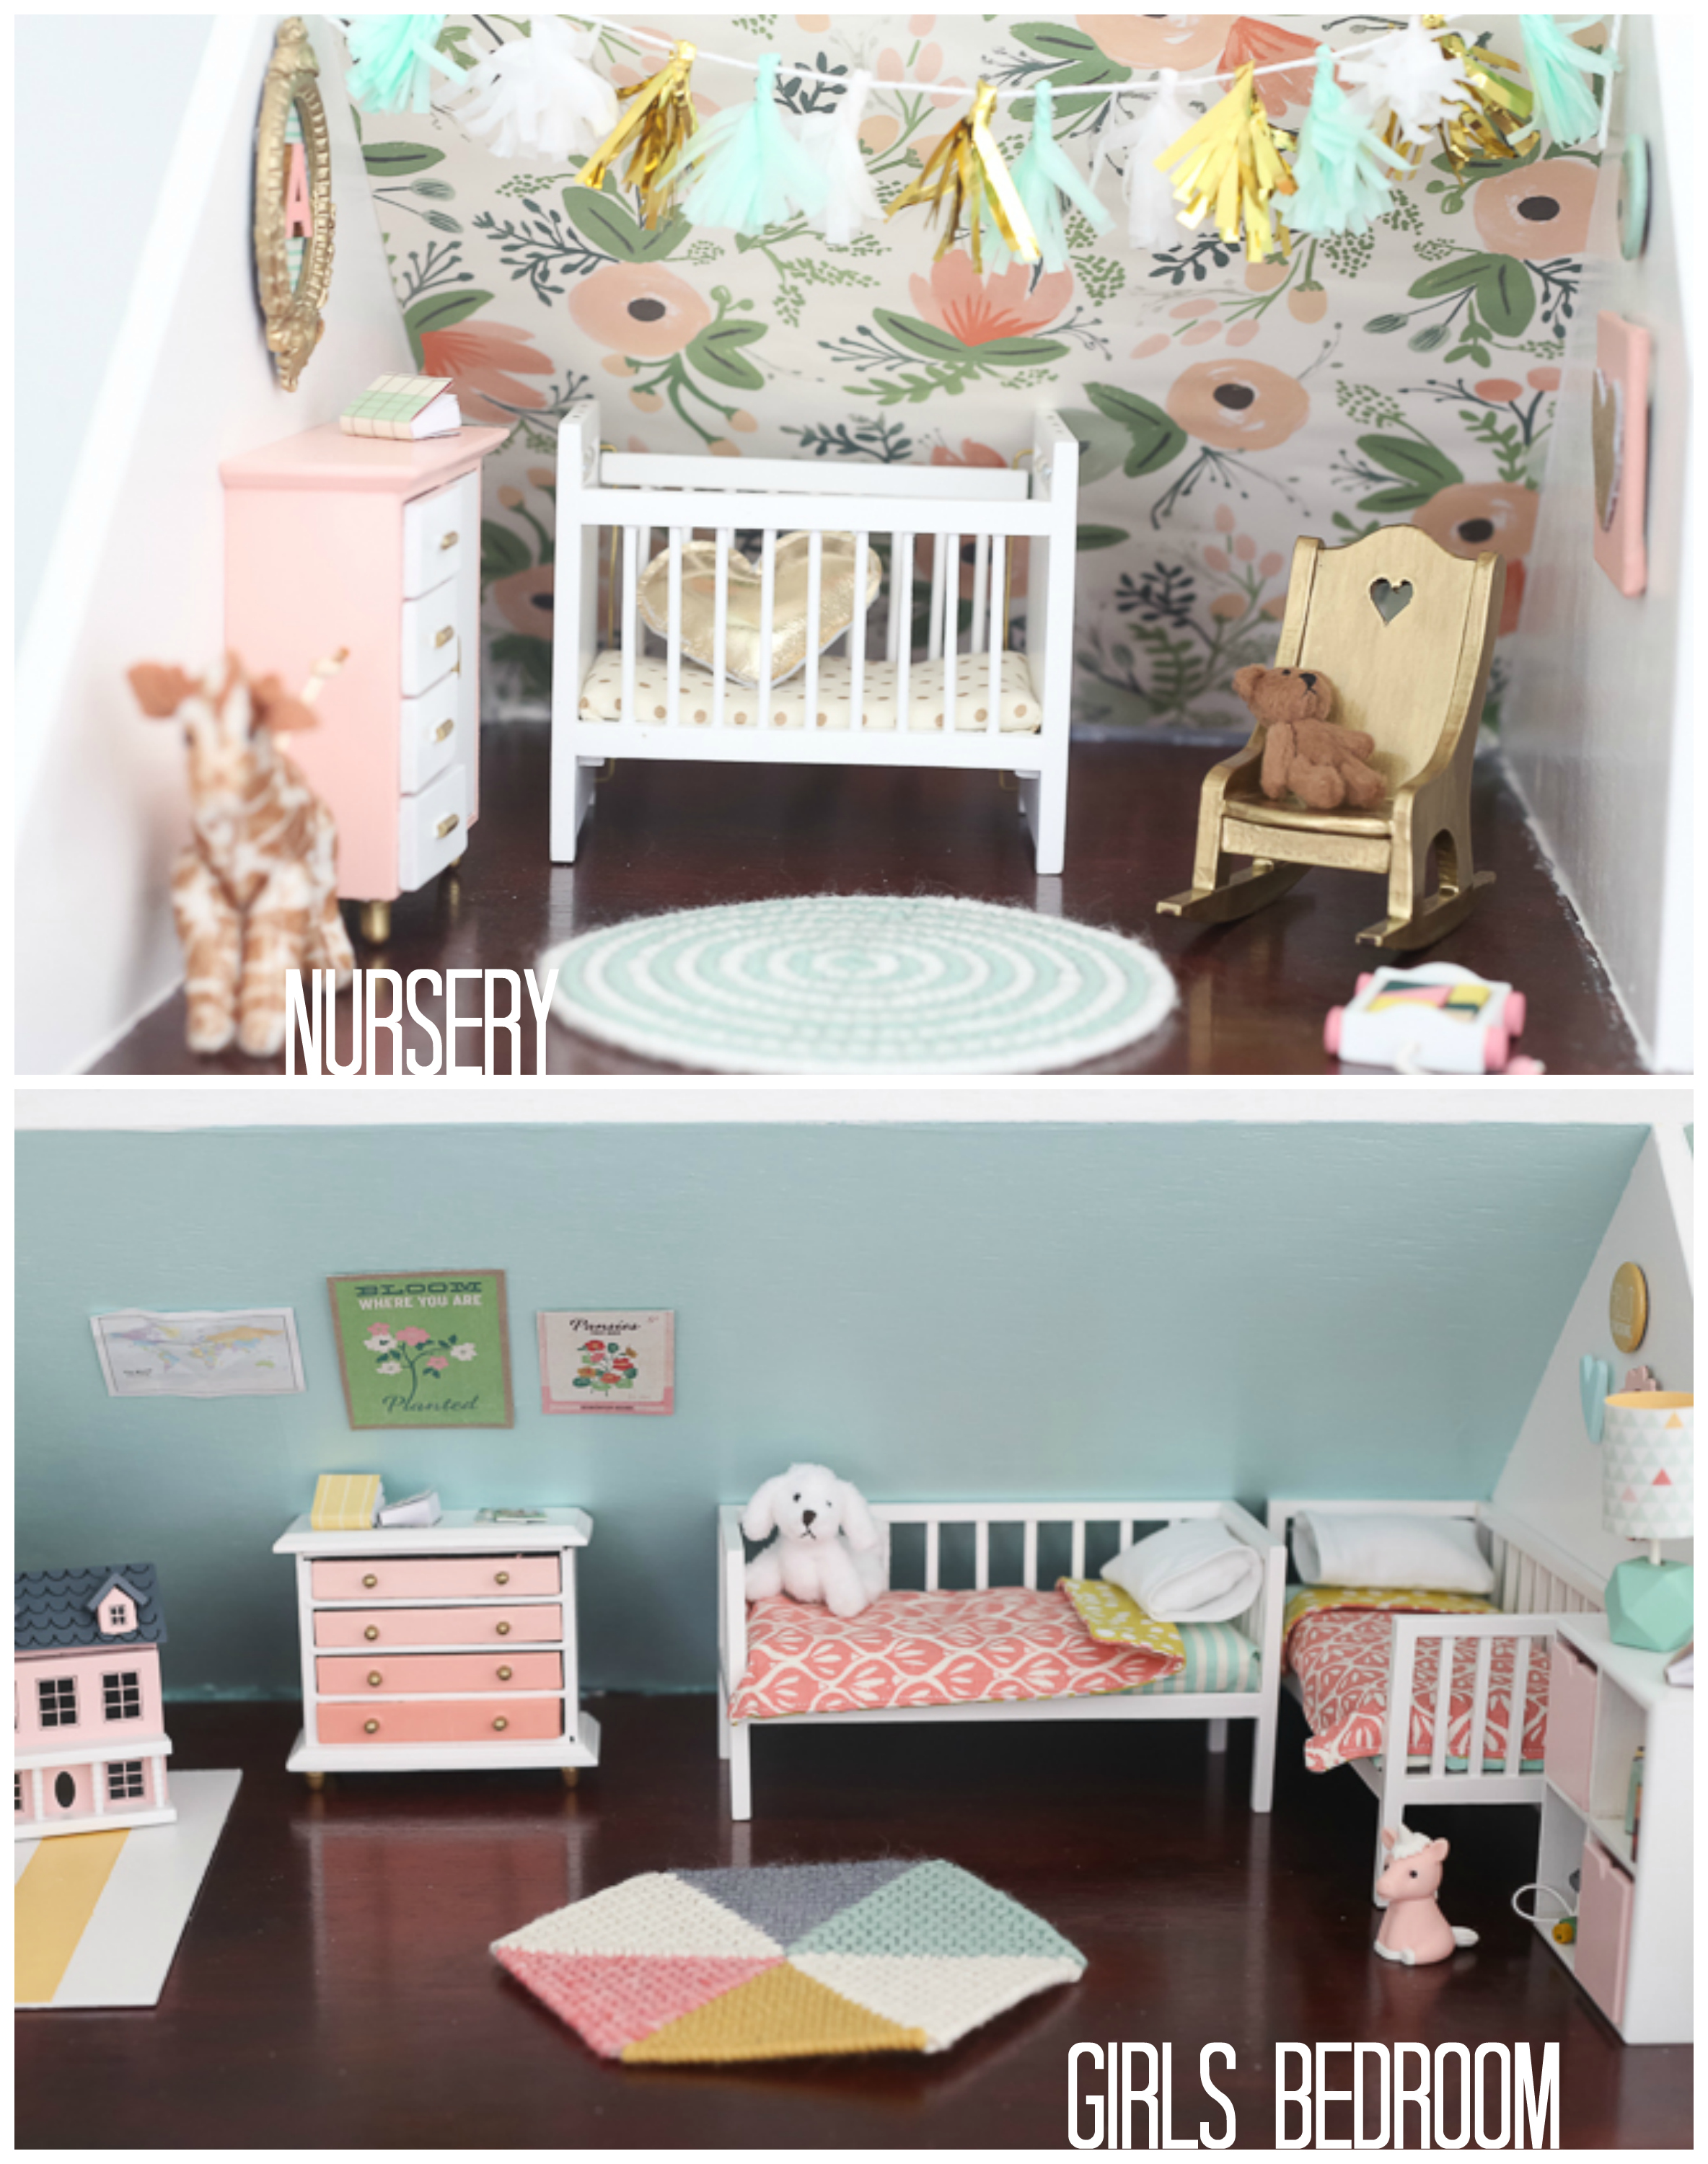 where to find dollhouse furniture